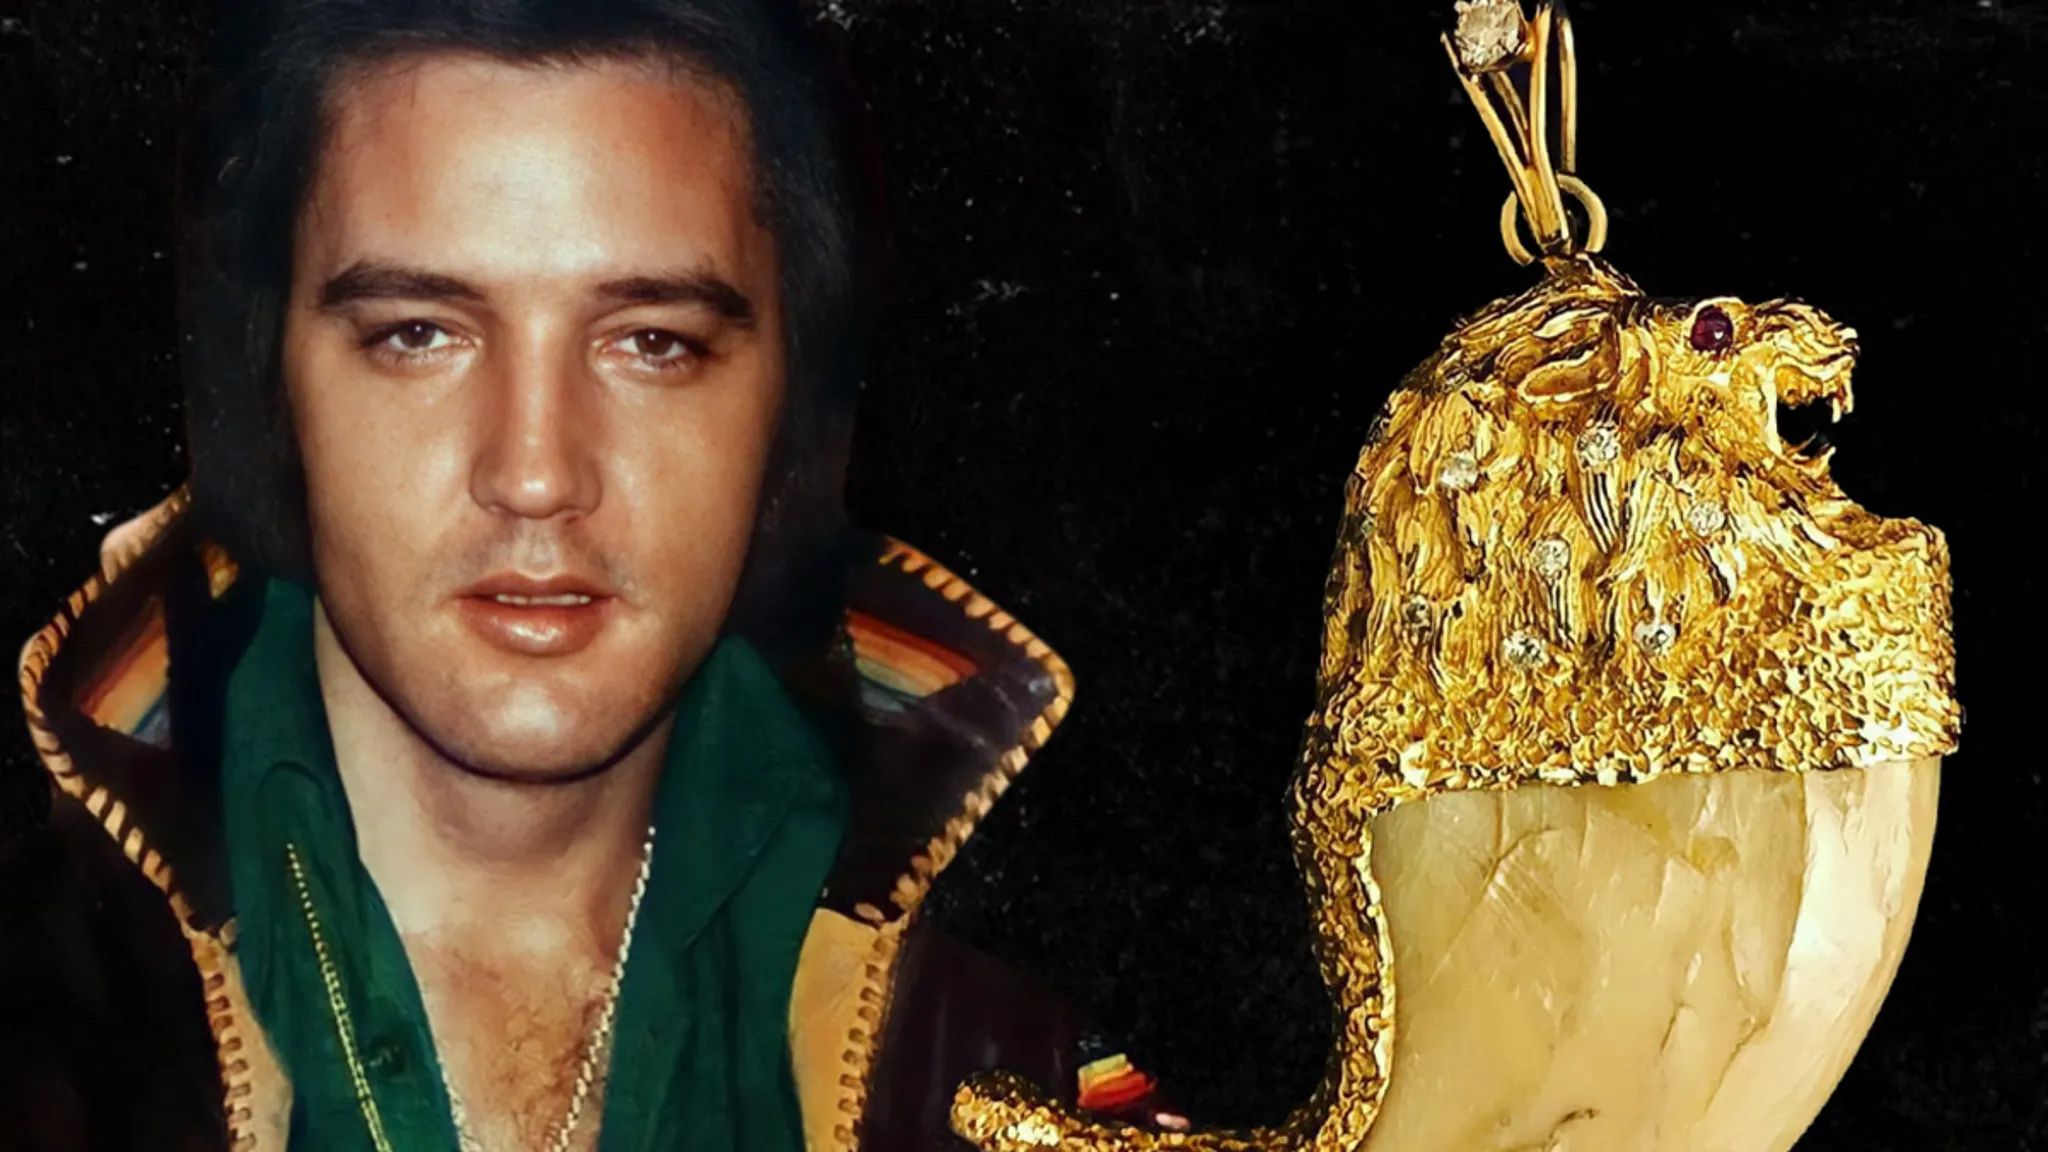 Elvis Presley Lion Claw Necklace To Be Auctioned, Estimated Value At $500K